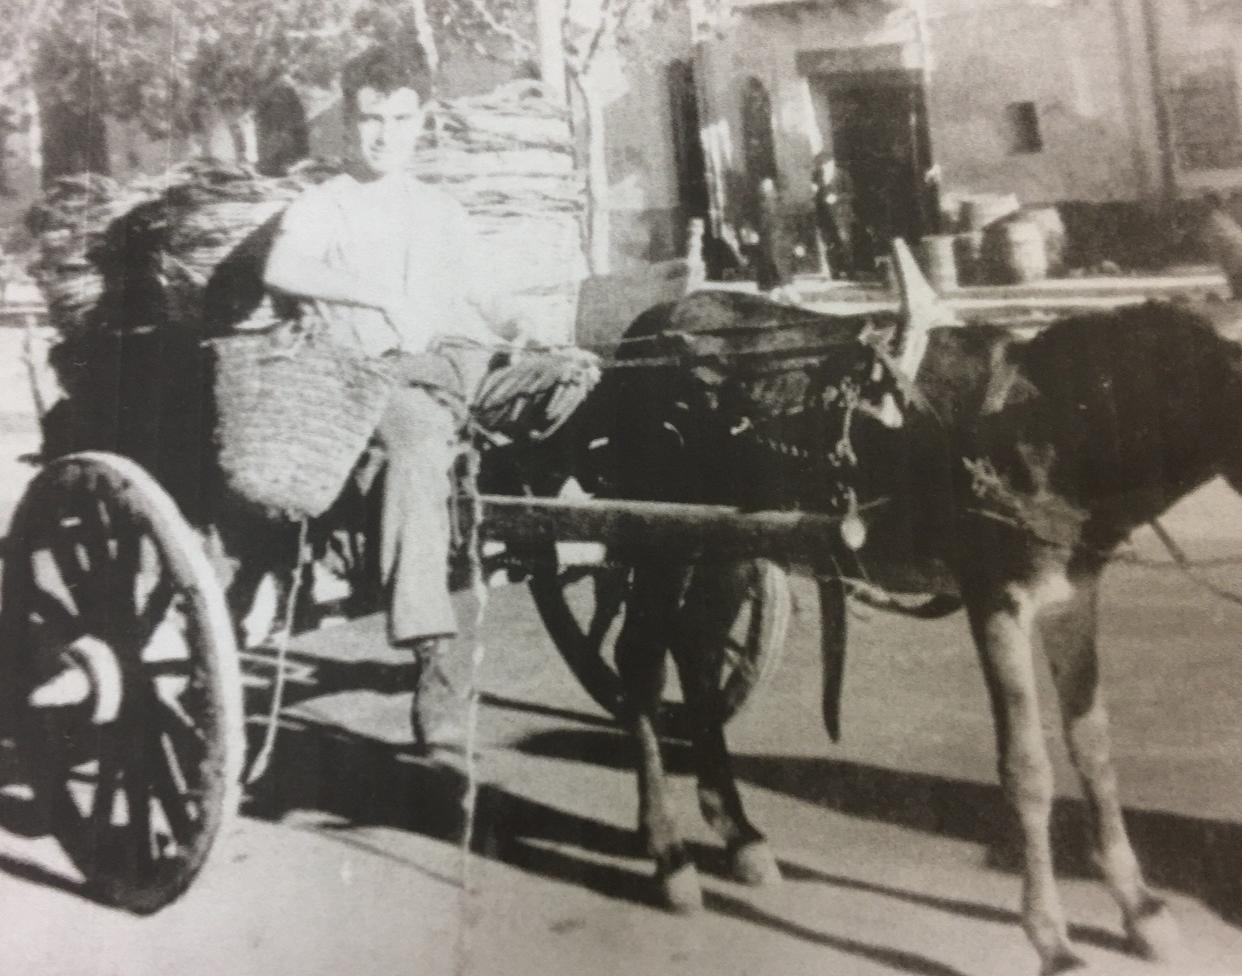 Frank Cassata often talked about his teenage days in Sicily, when he would sell citrus and olive oil from a cart pulled by a donkey named Cheech.